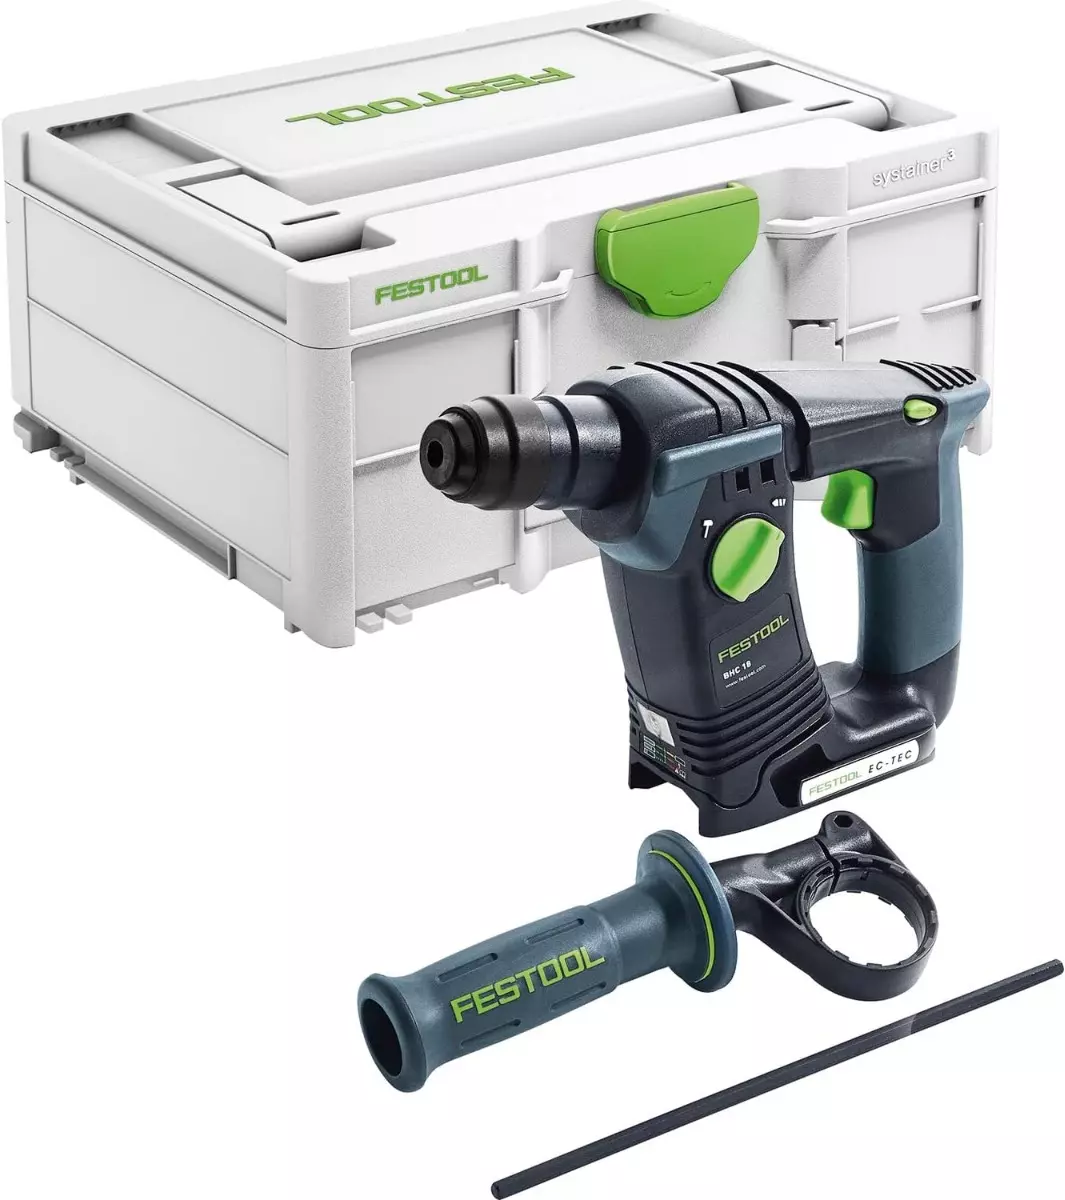 Perforateur 18V BHC 18-BASIC - FESTOOL - Sans batterie, ni chargeur + Systainer - 577600